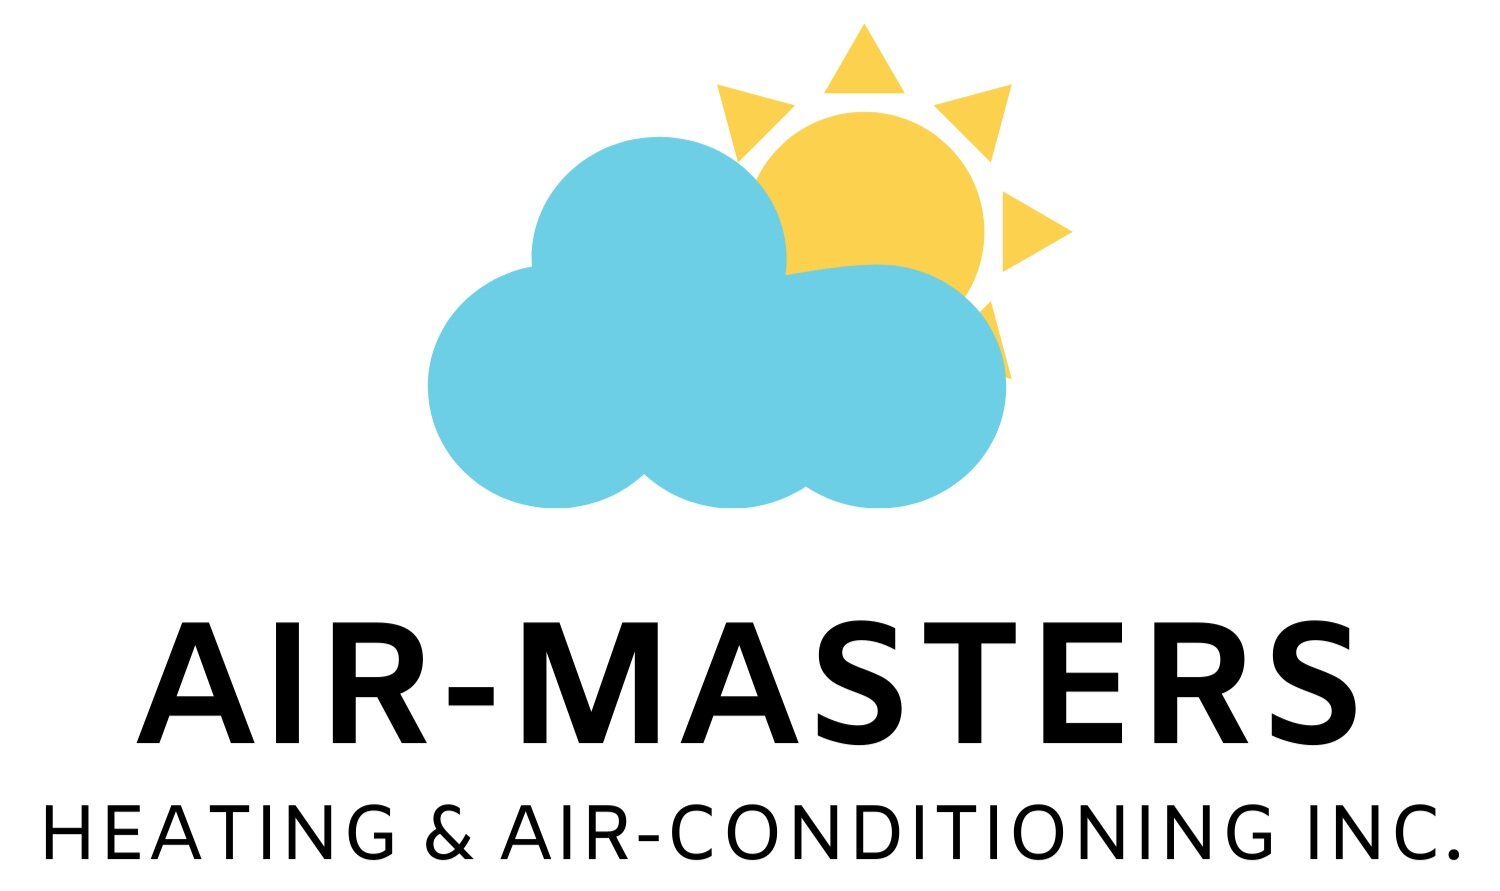 Air-Masters Heating and Air-Conditioning Inc.